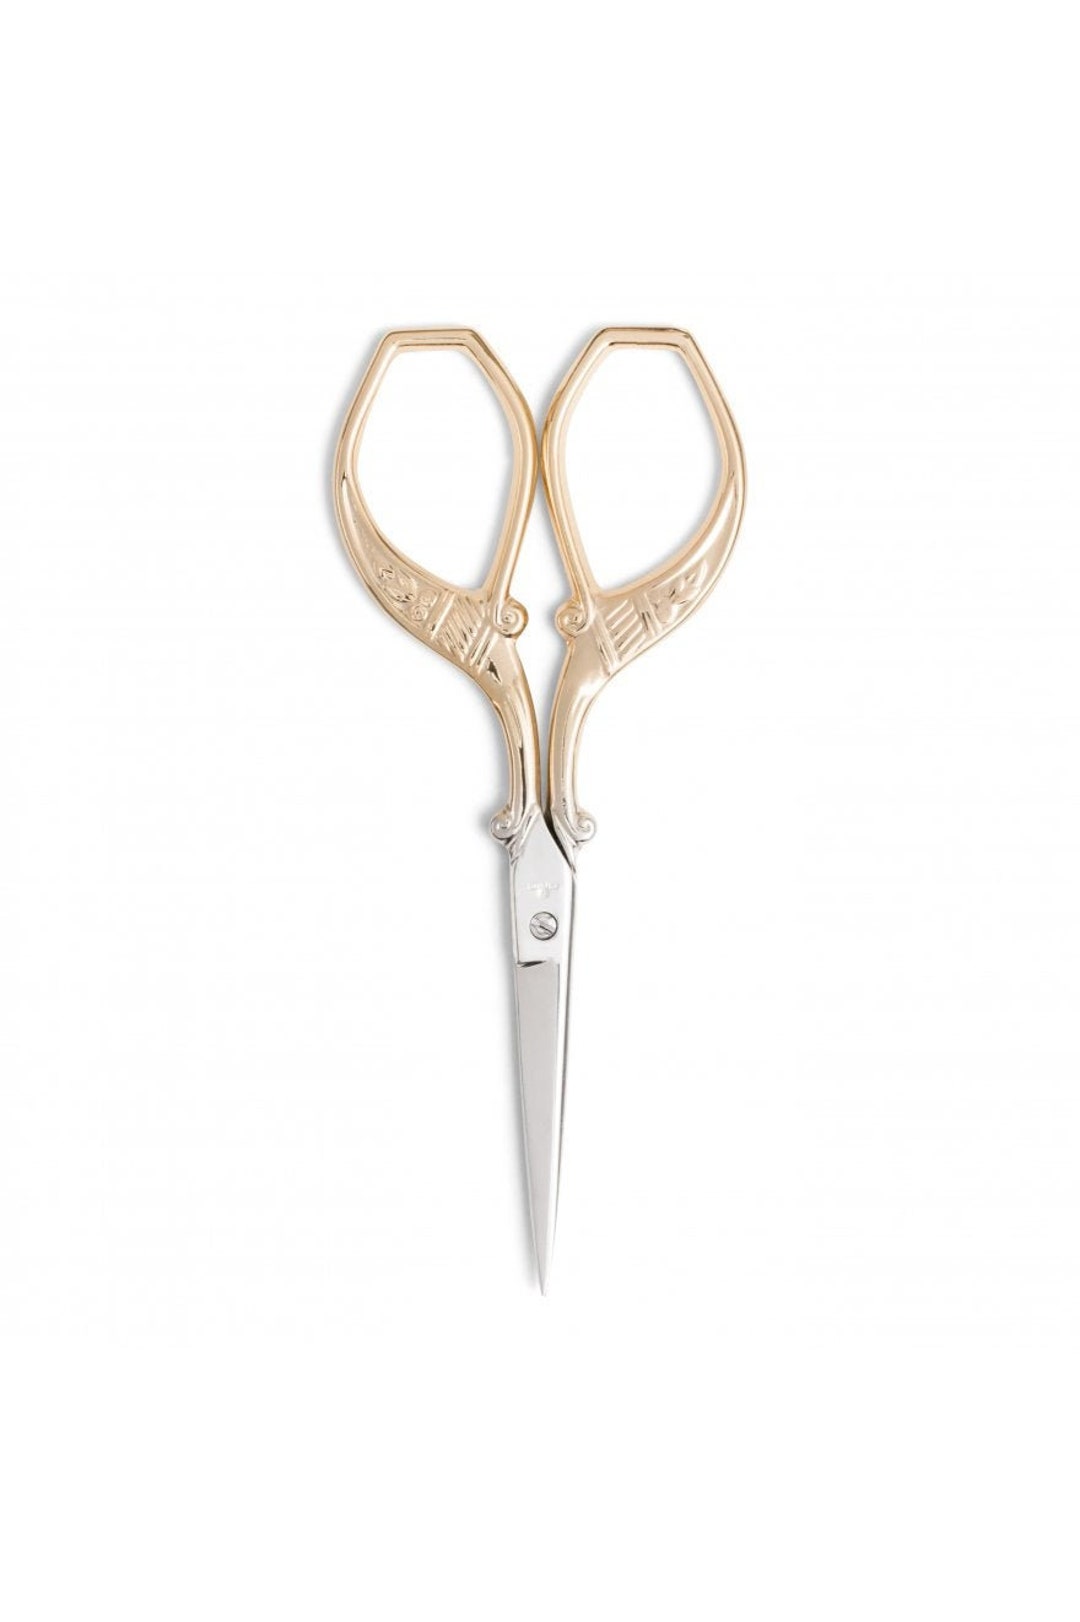 Embroidery Scissors - DMC Peacock Scissors - Sewing Scissors - Embroidery -  Needlepoint - Crewel - 3.75 inch length - Quality Steel Blades